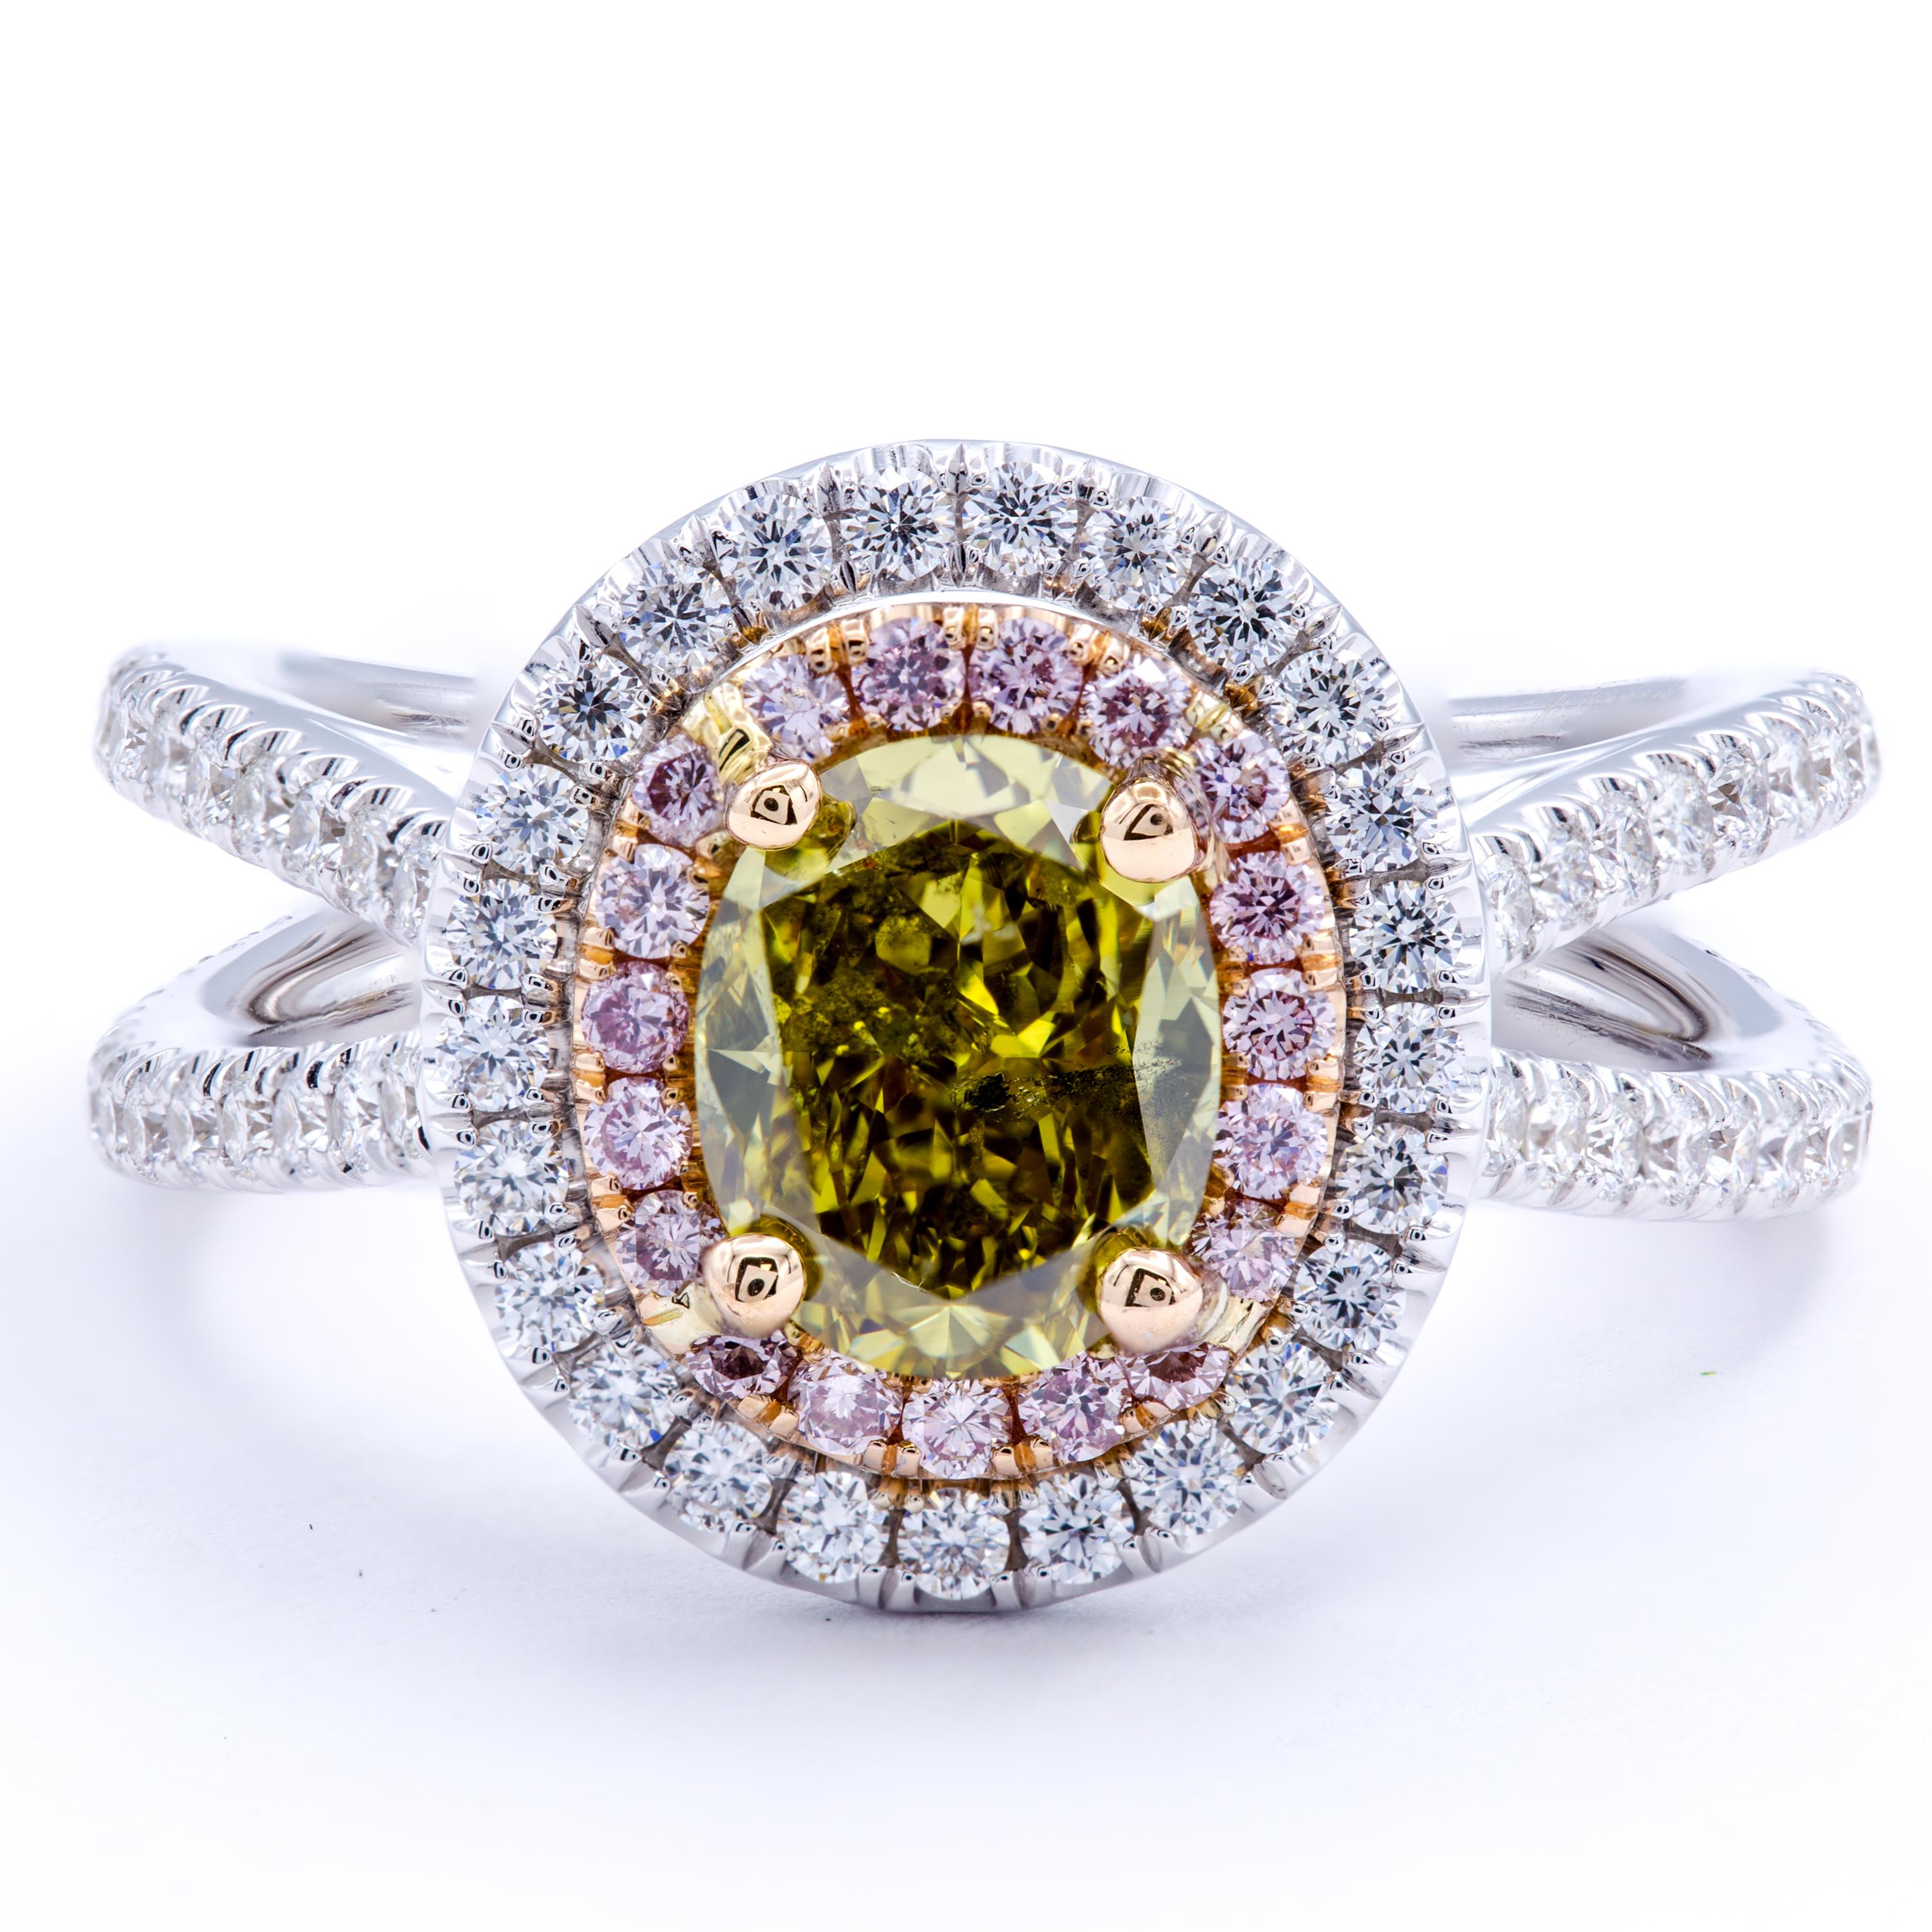 A rare GIA certified natural color diamond shows vibrant shades of fancy deep gray, green, and yellow throughout an Oval faceted shape. A platinum and multicolor 18Kt gold band carries a split shank design that is studded entirely with glittering